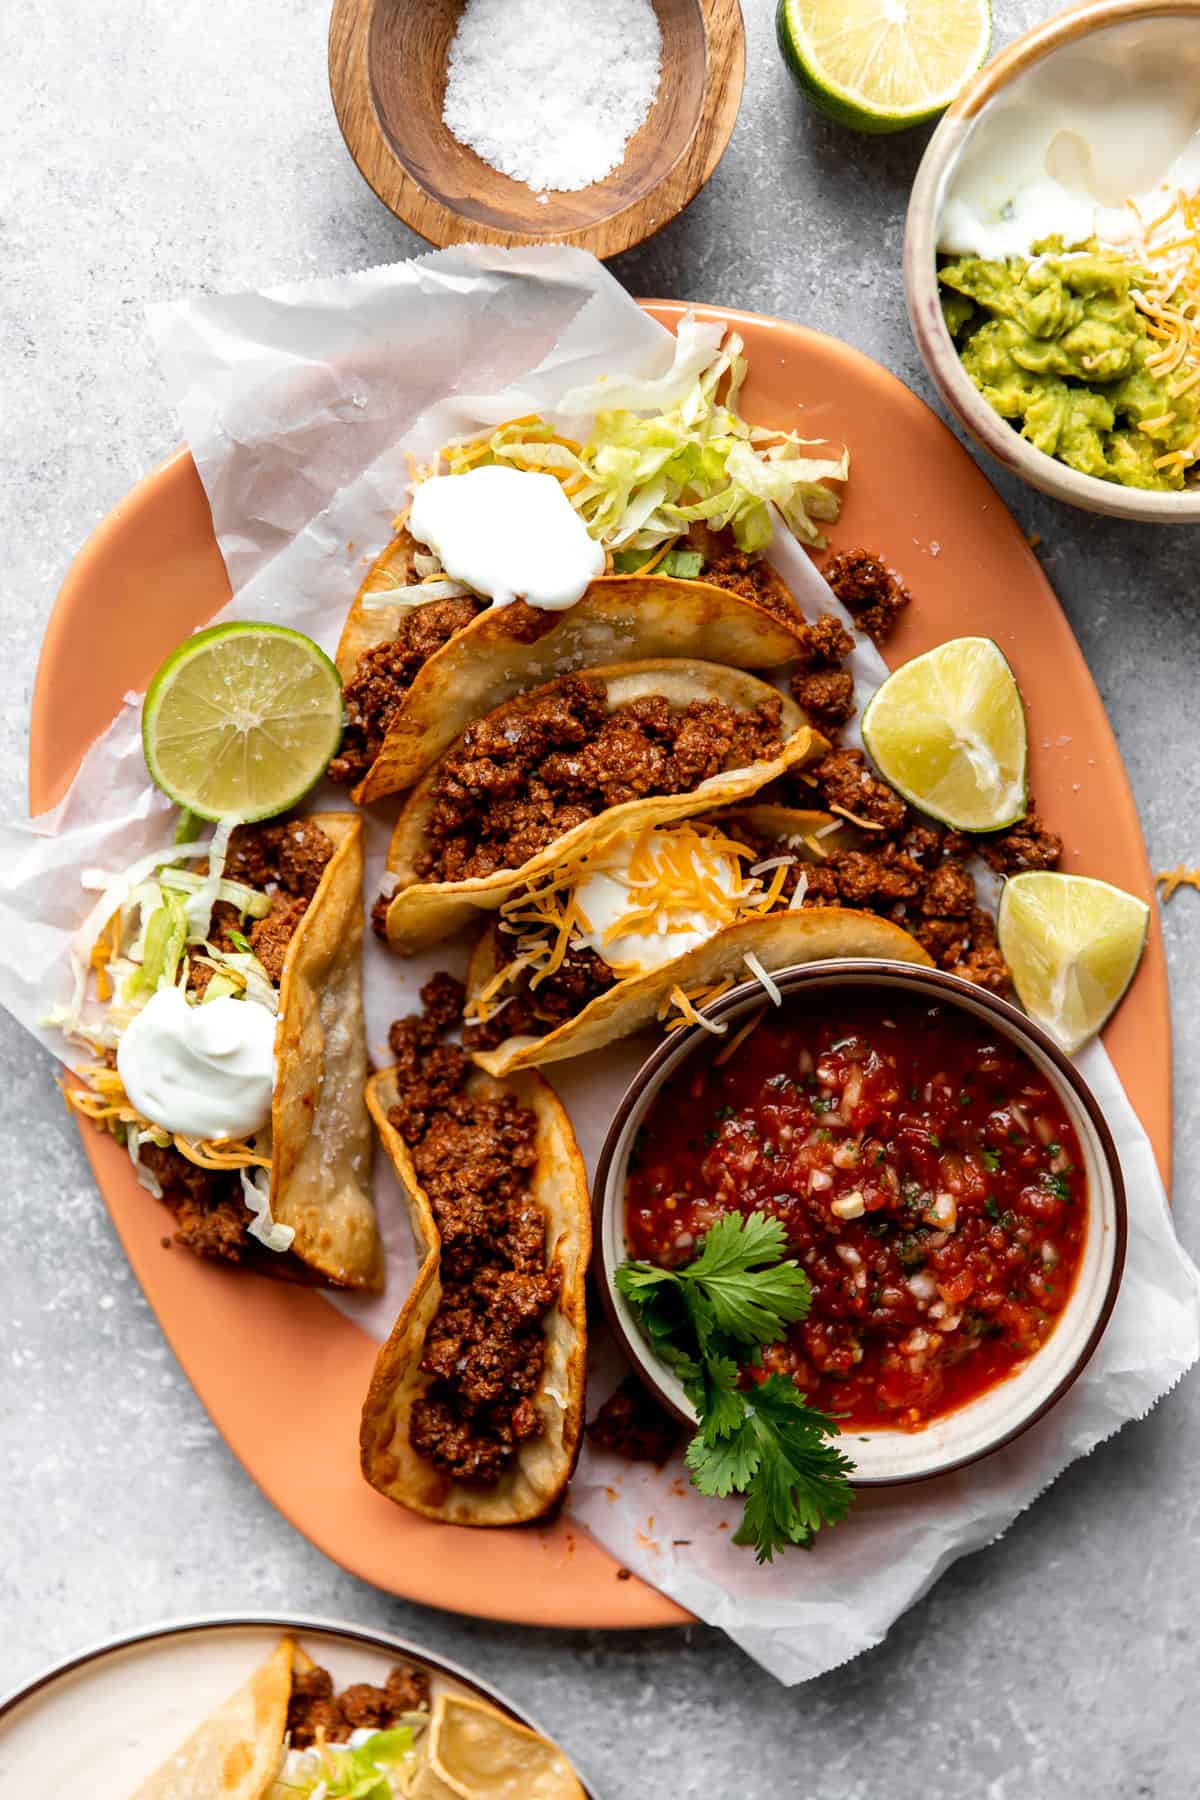 Plate of tacos made with ground beef.